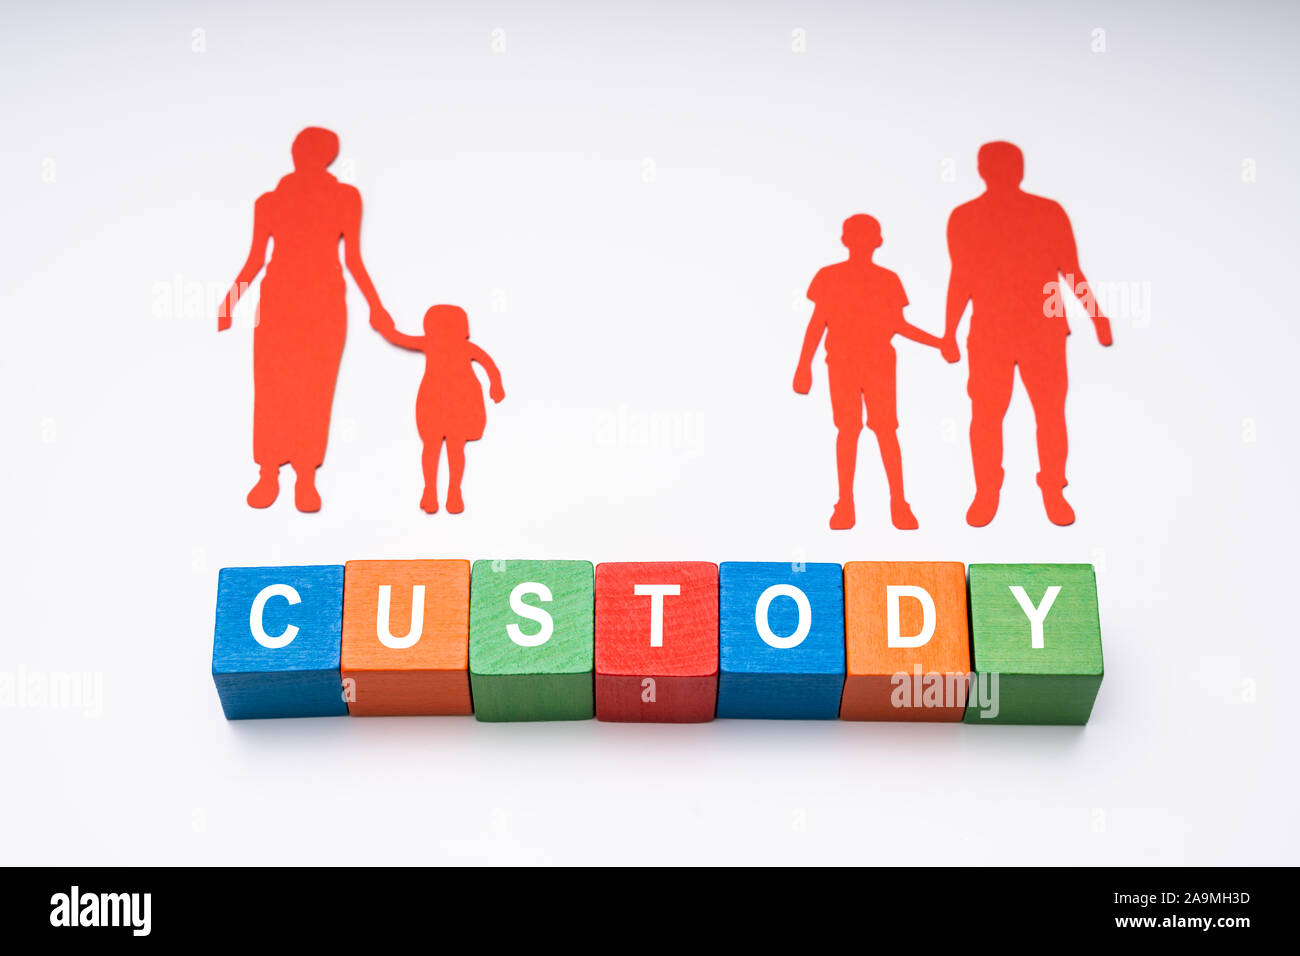 Elevated View Of Word Custody With Paper Figures Of Family On White Background Stock Photo